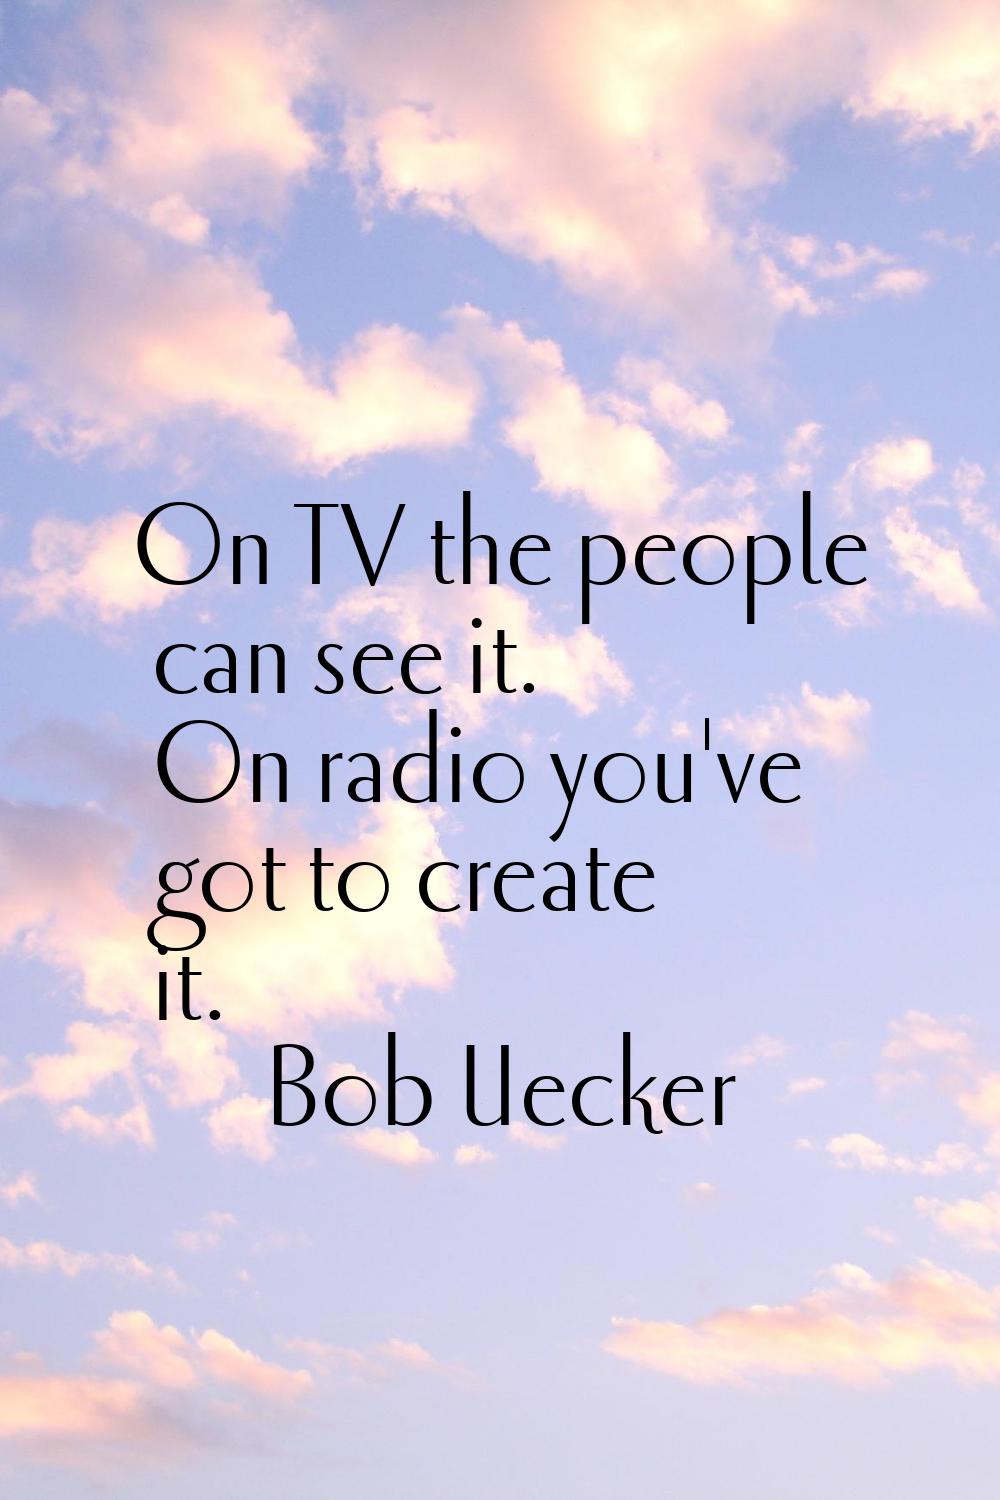 On TV the people can see it. On radio you've got to create it.